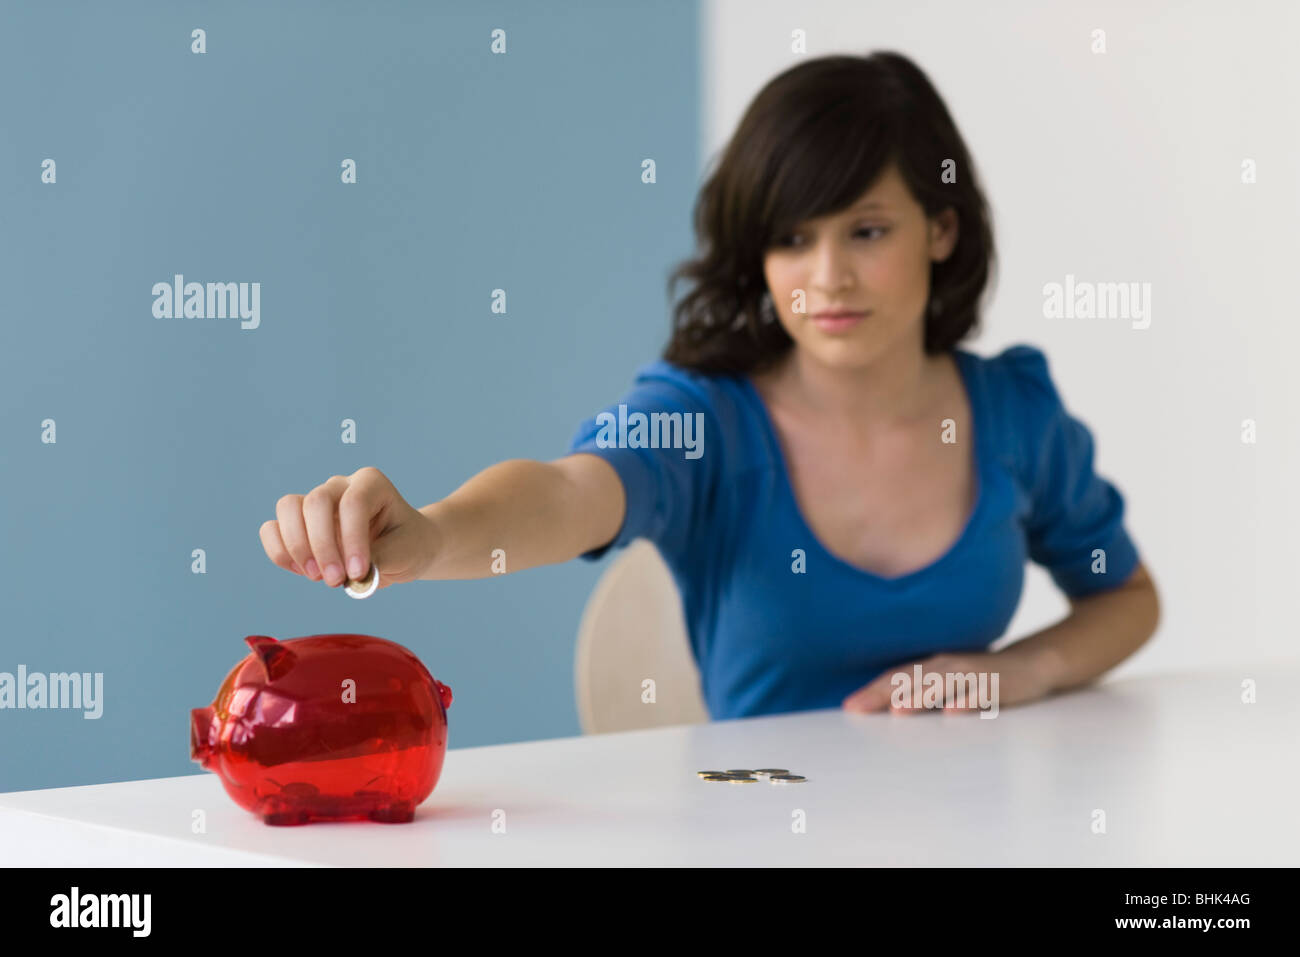 Teenage girl putting coin in piggy bank Stock Photo